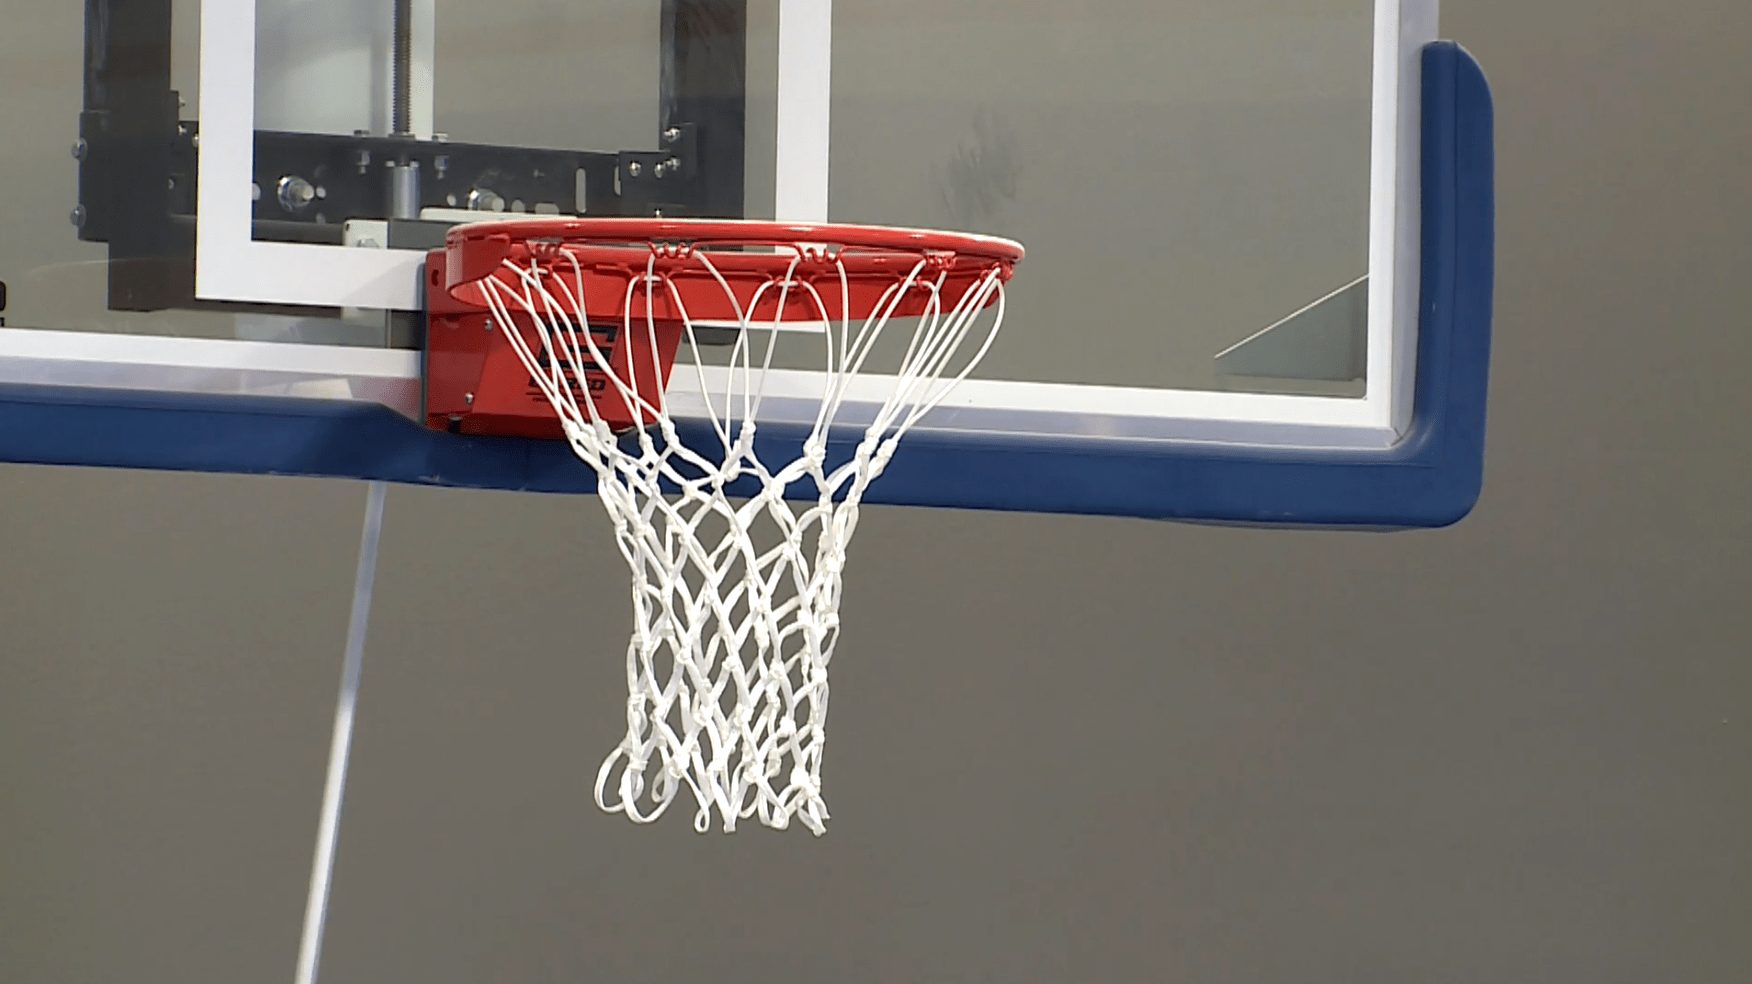 A high school basketball game ended with an unusual 4-2 final score